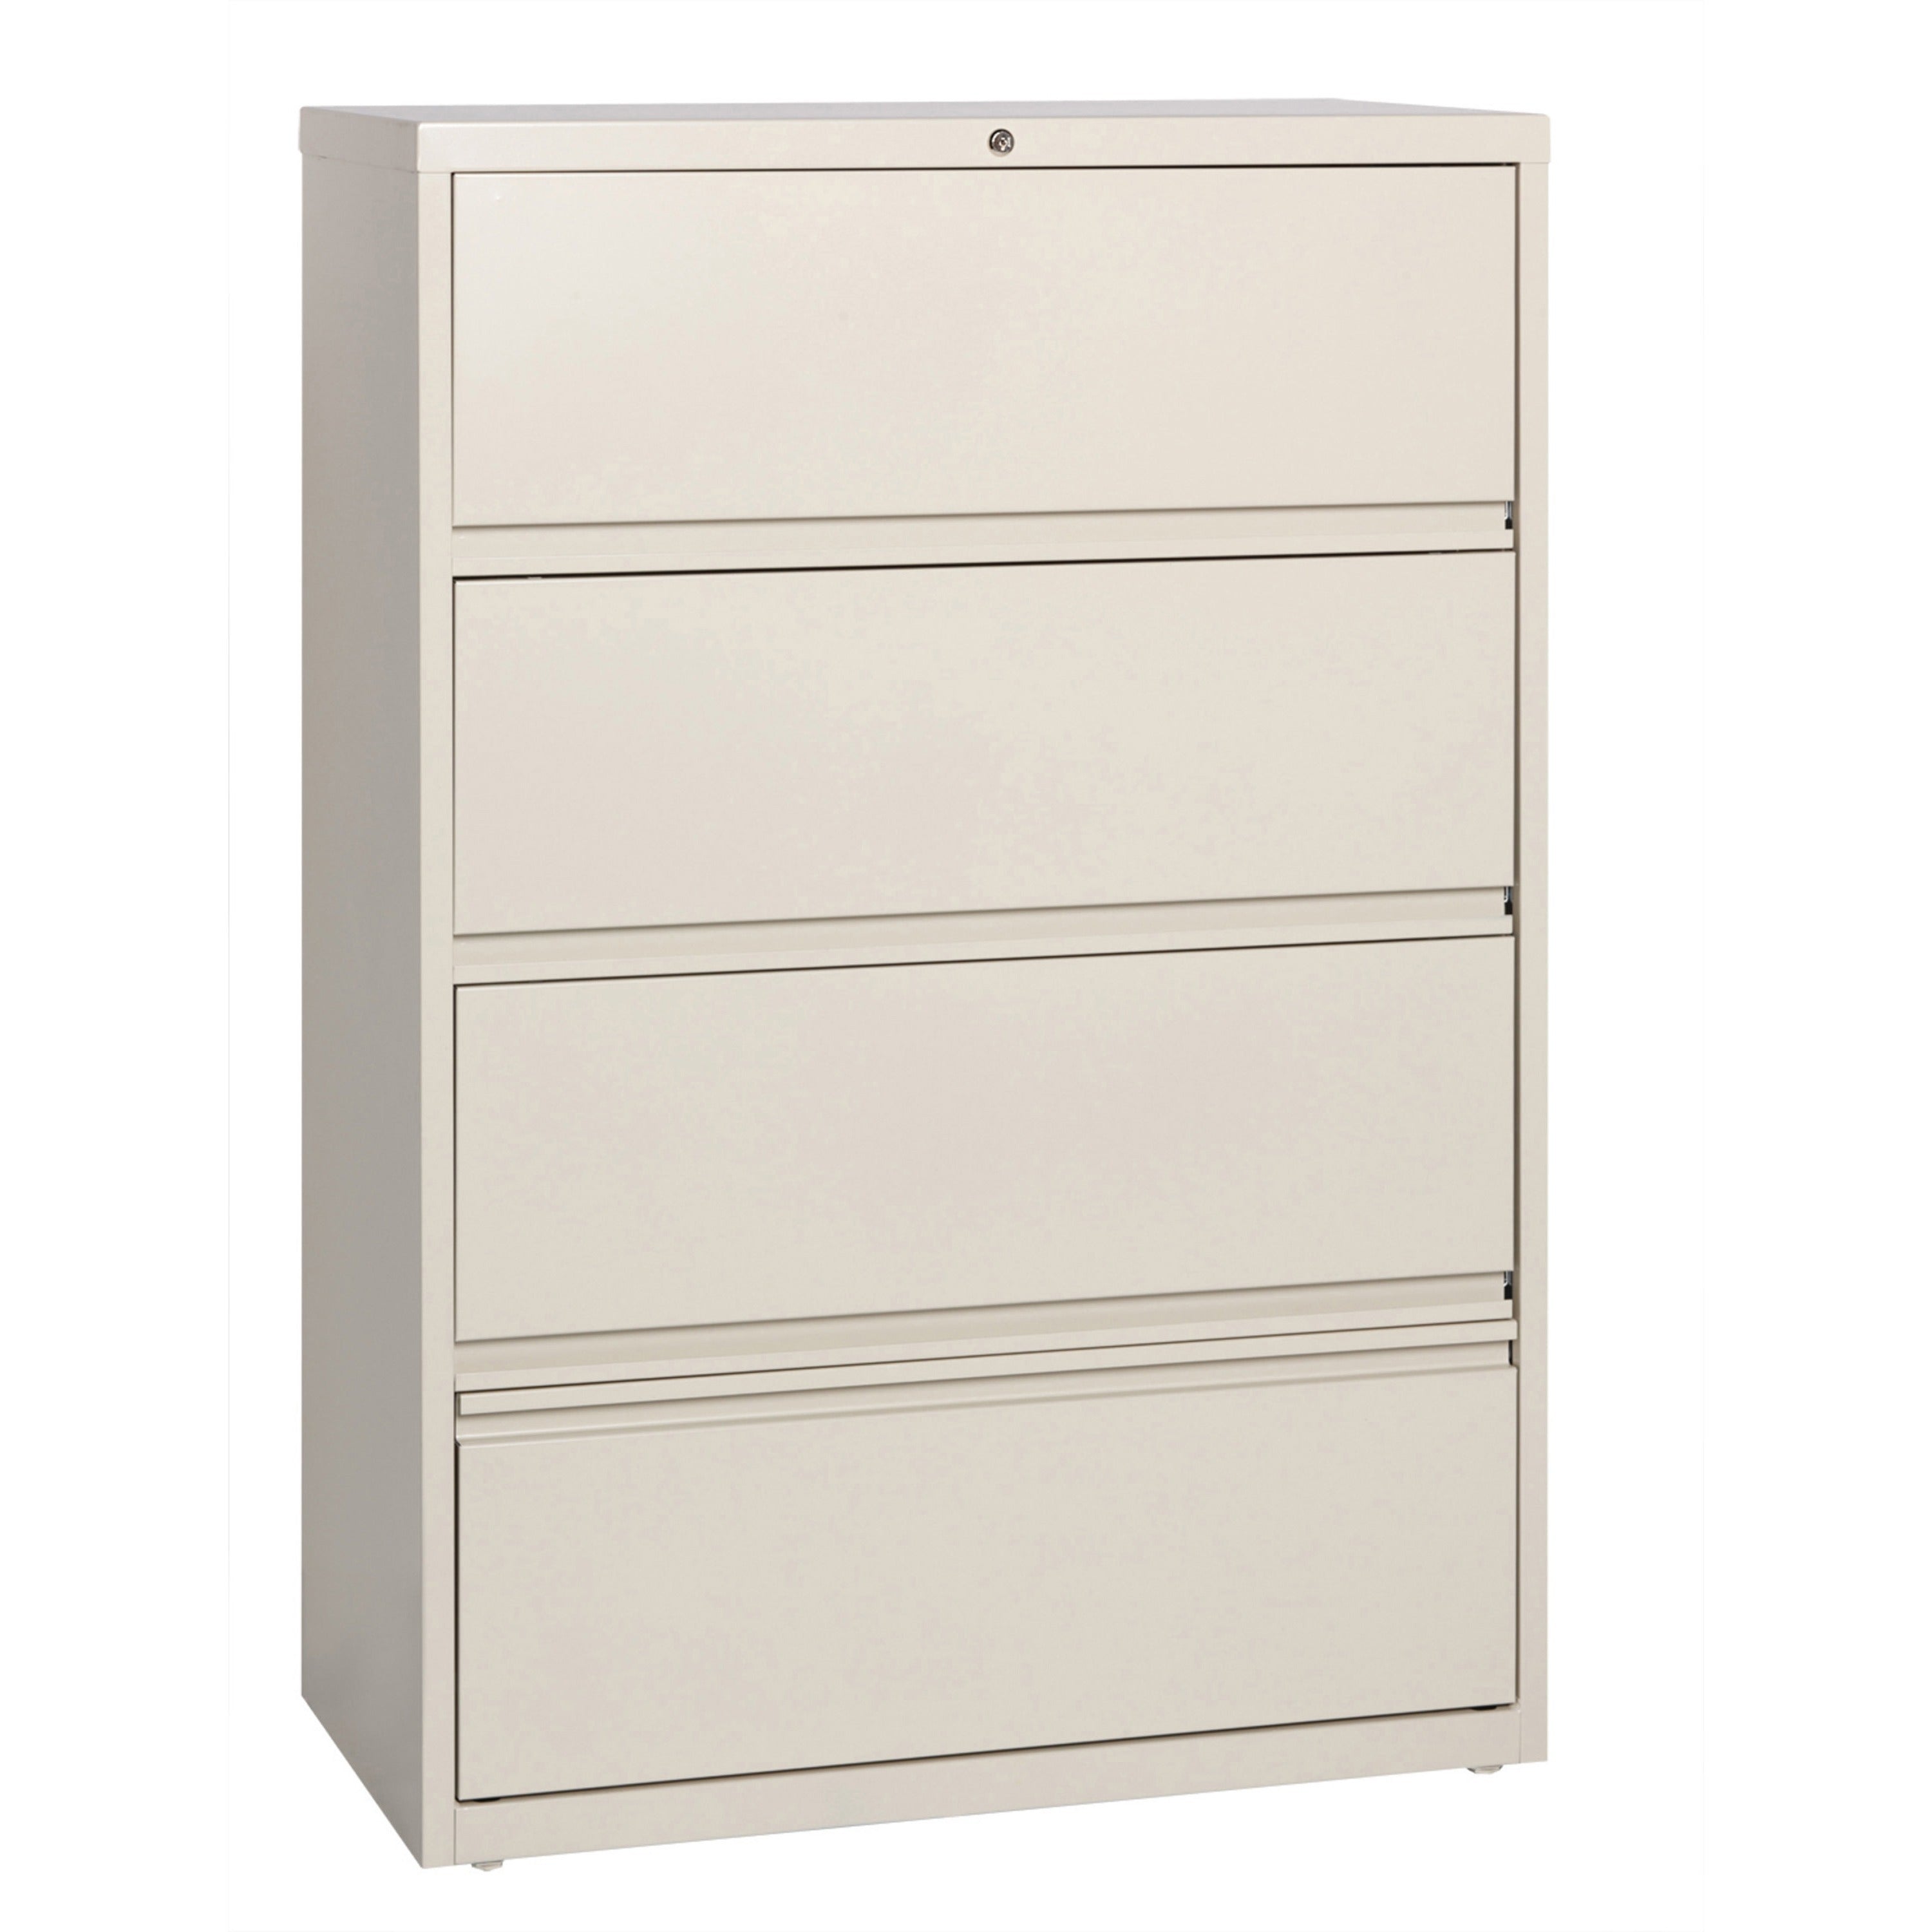 Lorell Fortress Lateral File with Roll-Out Shelf - 36" x 18.6" x 52.5" - 4 x Drawer(s) for File - Letter, Legal, A4 - Ball-bearing Suspension, Interlocking, Heavy Duty, Recessed Handle, Leveling Glide - Putty - Metal - Recycled - 1